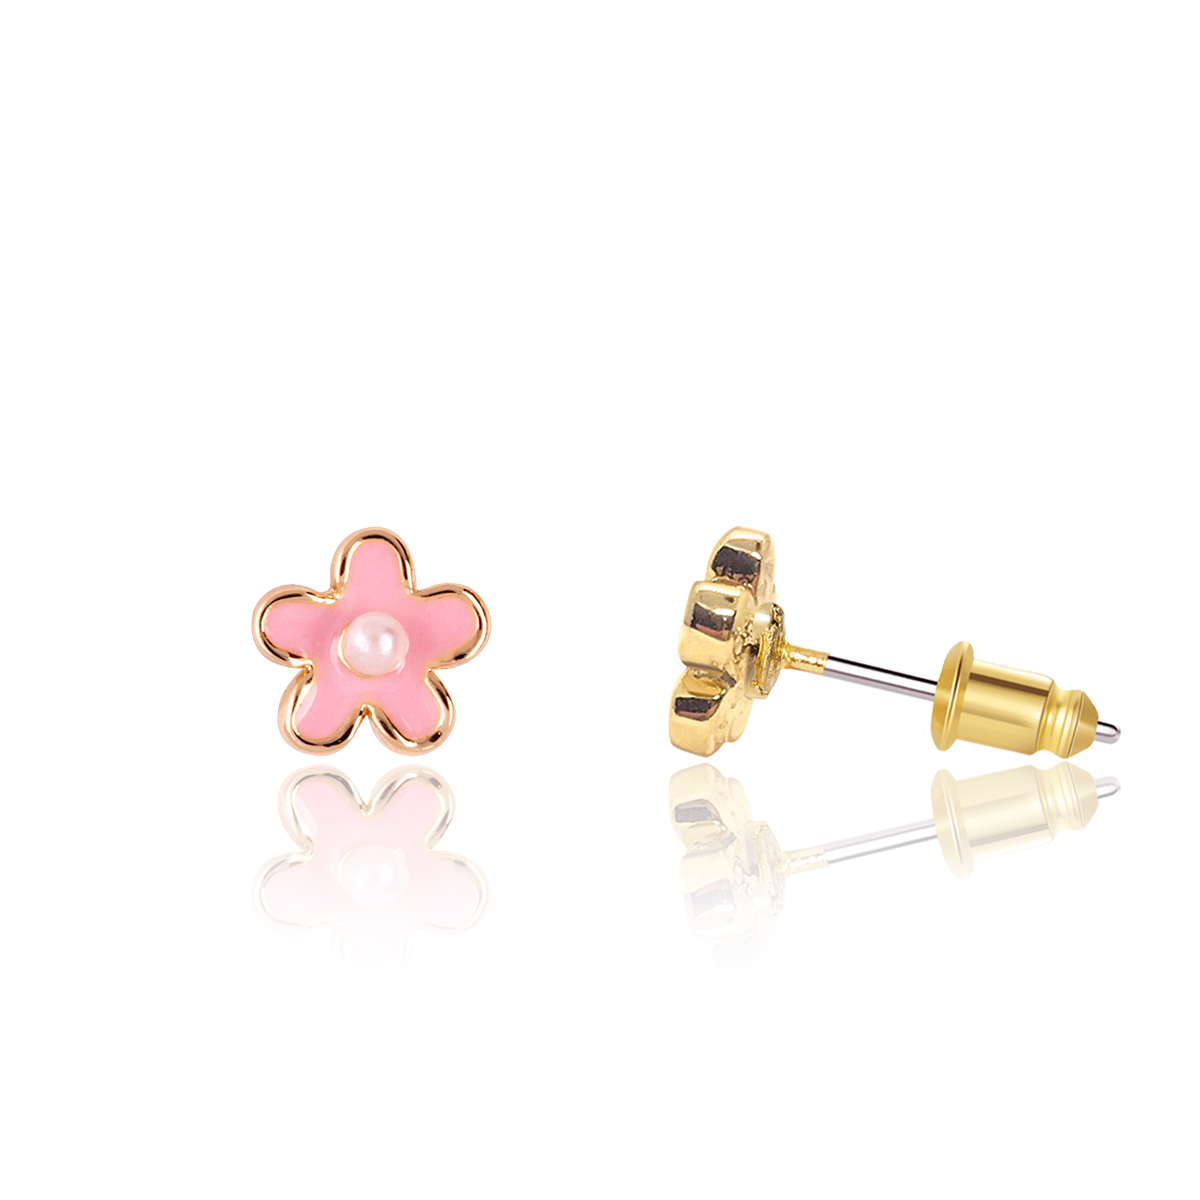 Pink Flower 14K Gold Screw Back Earrings for Girls Children Women - Dainty Pink CZ Floral Studs for Toddlers, Minimalist Everyday Jewelry